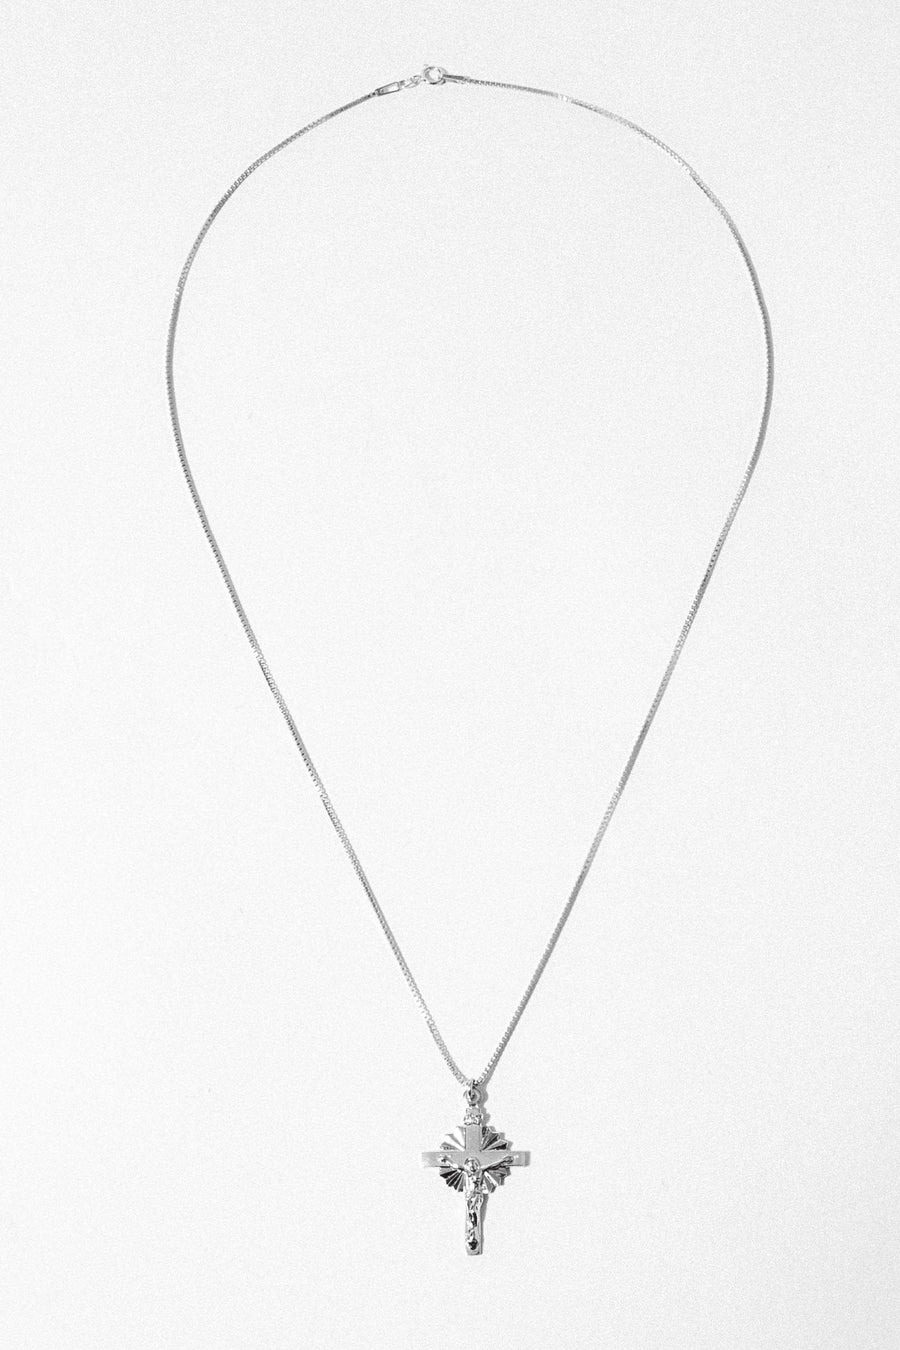 Gempacked Jewelry 20 Inches / Silver Calvary Necklace